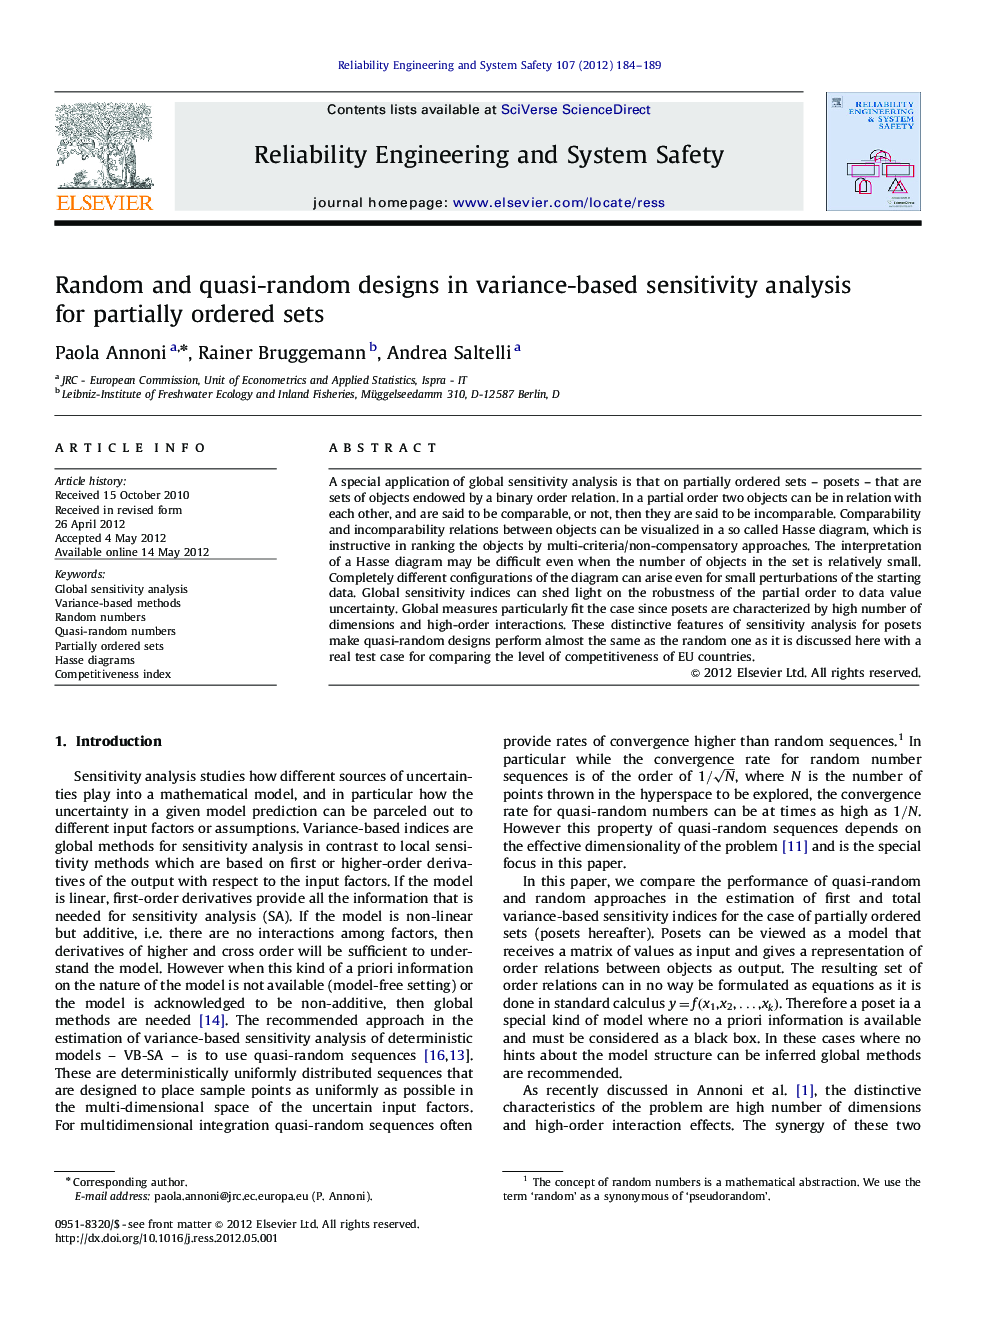 Random and quasi-random designs in variance-based sensitivity analysis for partially ordered sets